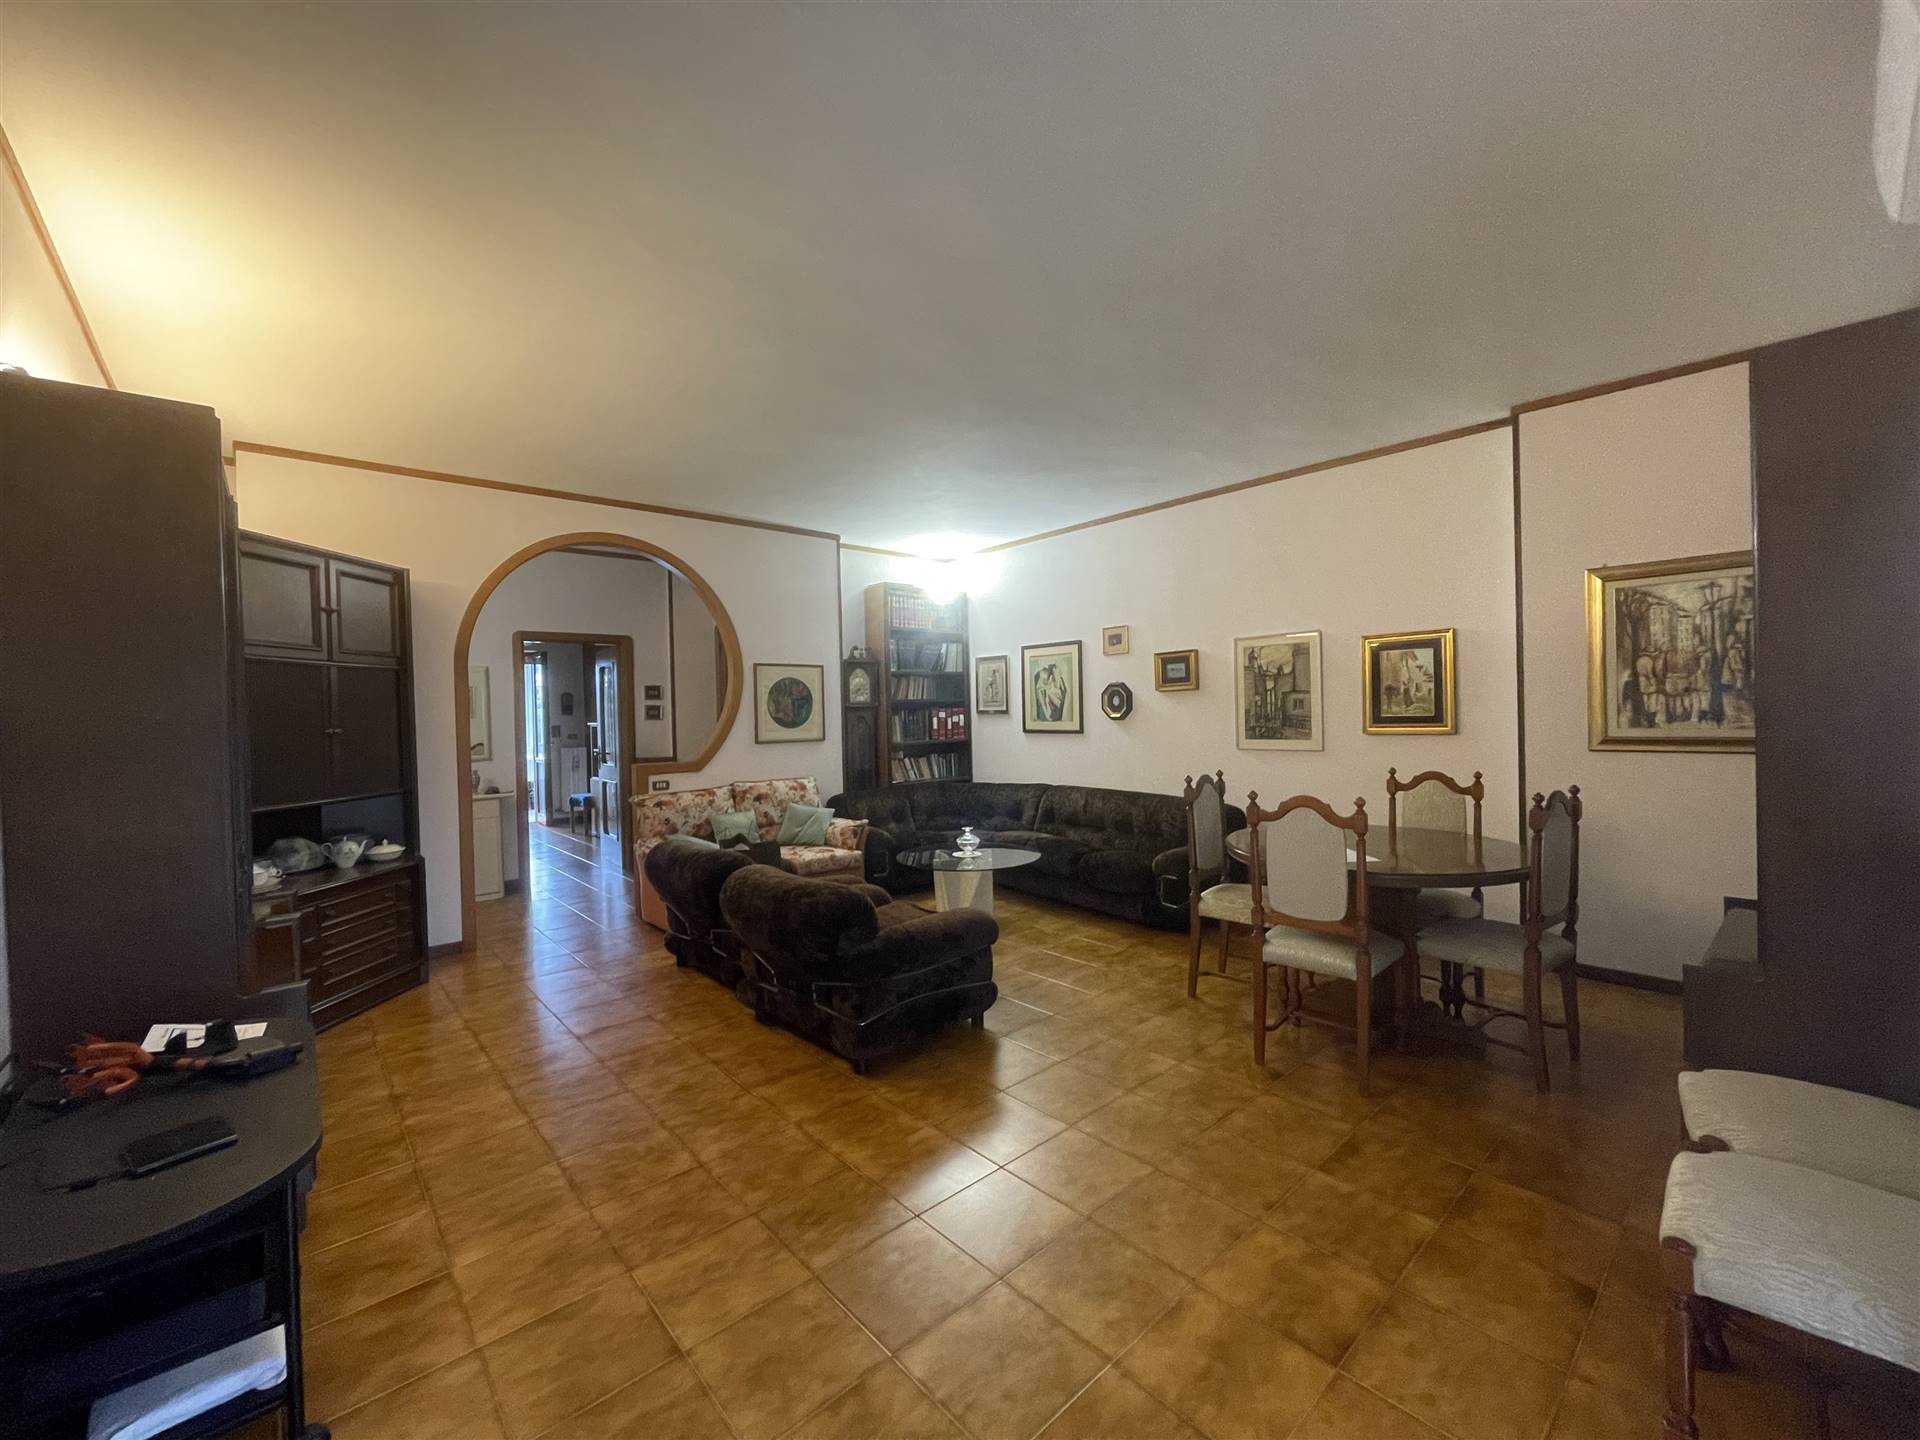 EST, LECCE, Apartment for sale of 163 Sq. mt., Good condition, Heating Individual heating system, Energetic class: F, Epi: 89,3591 kwh/m2 year, 